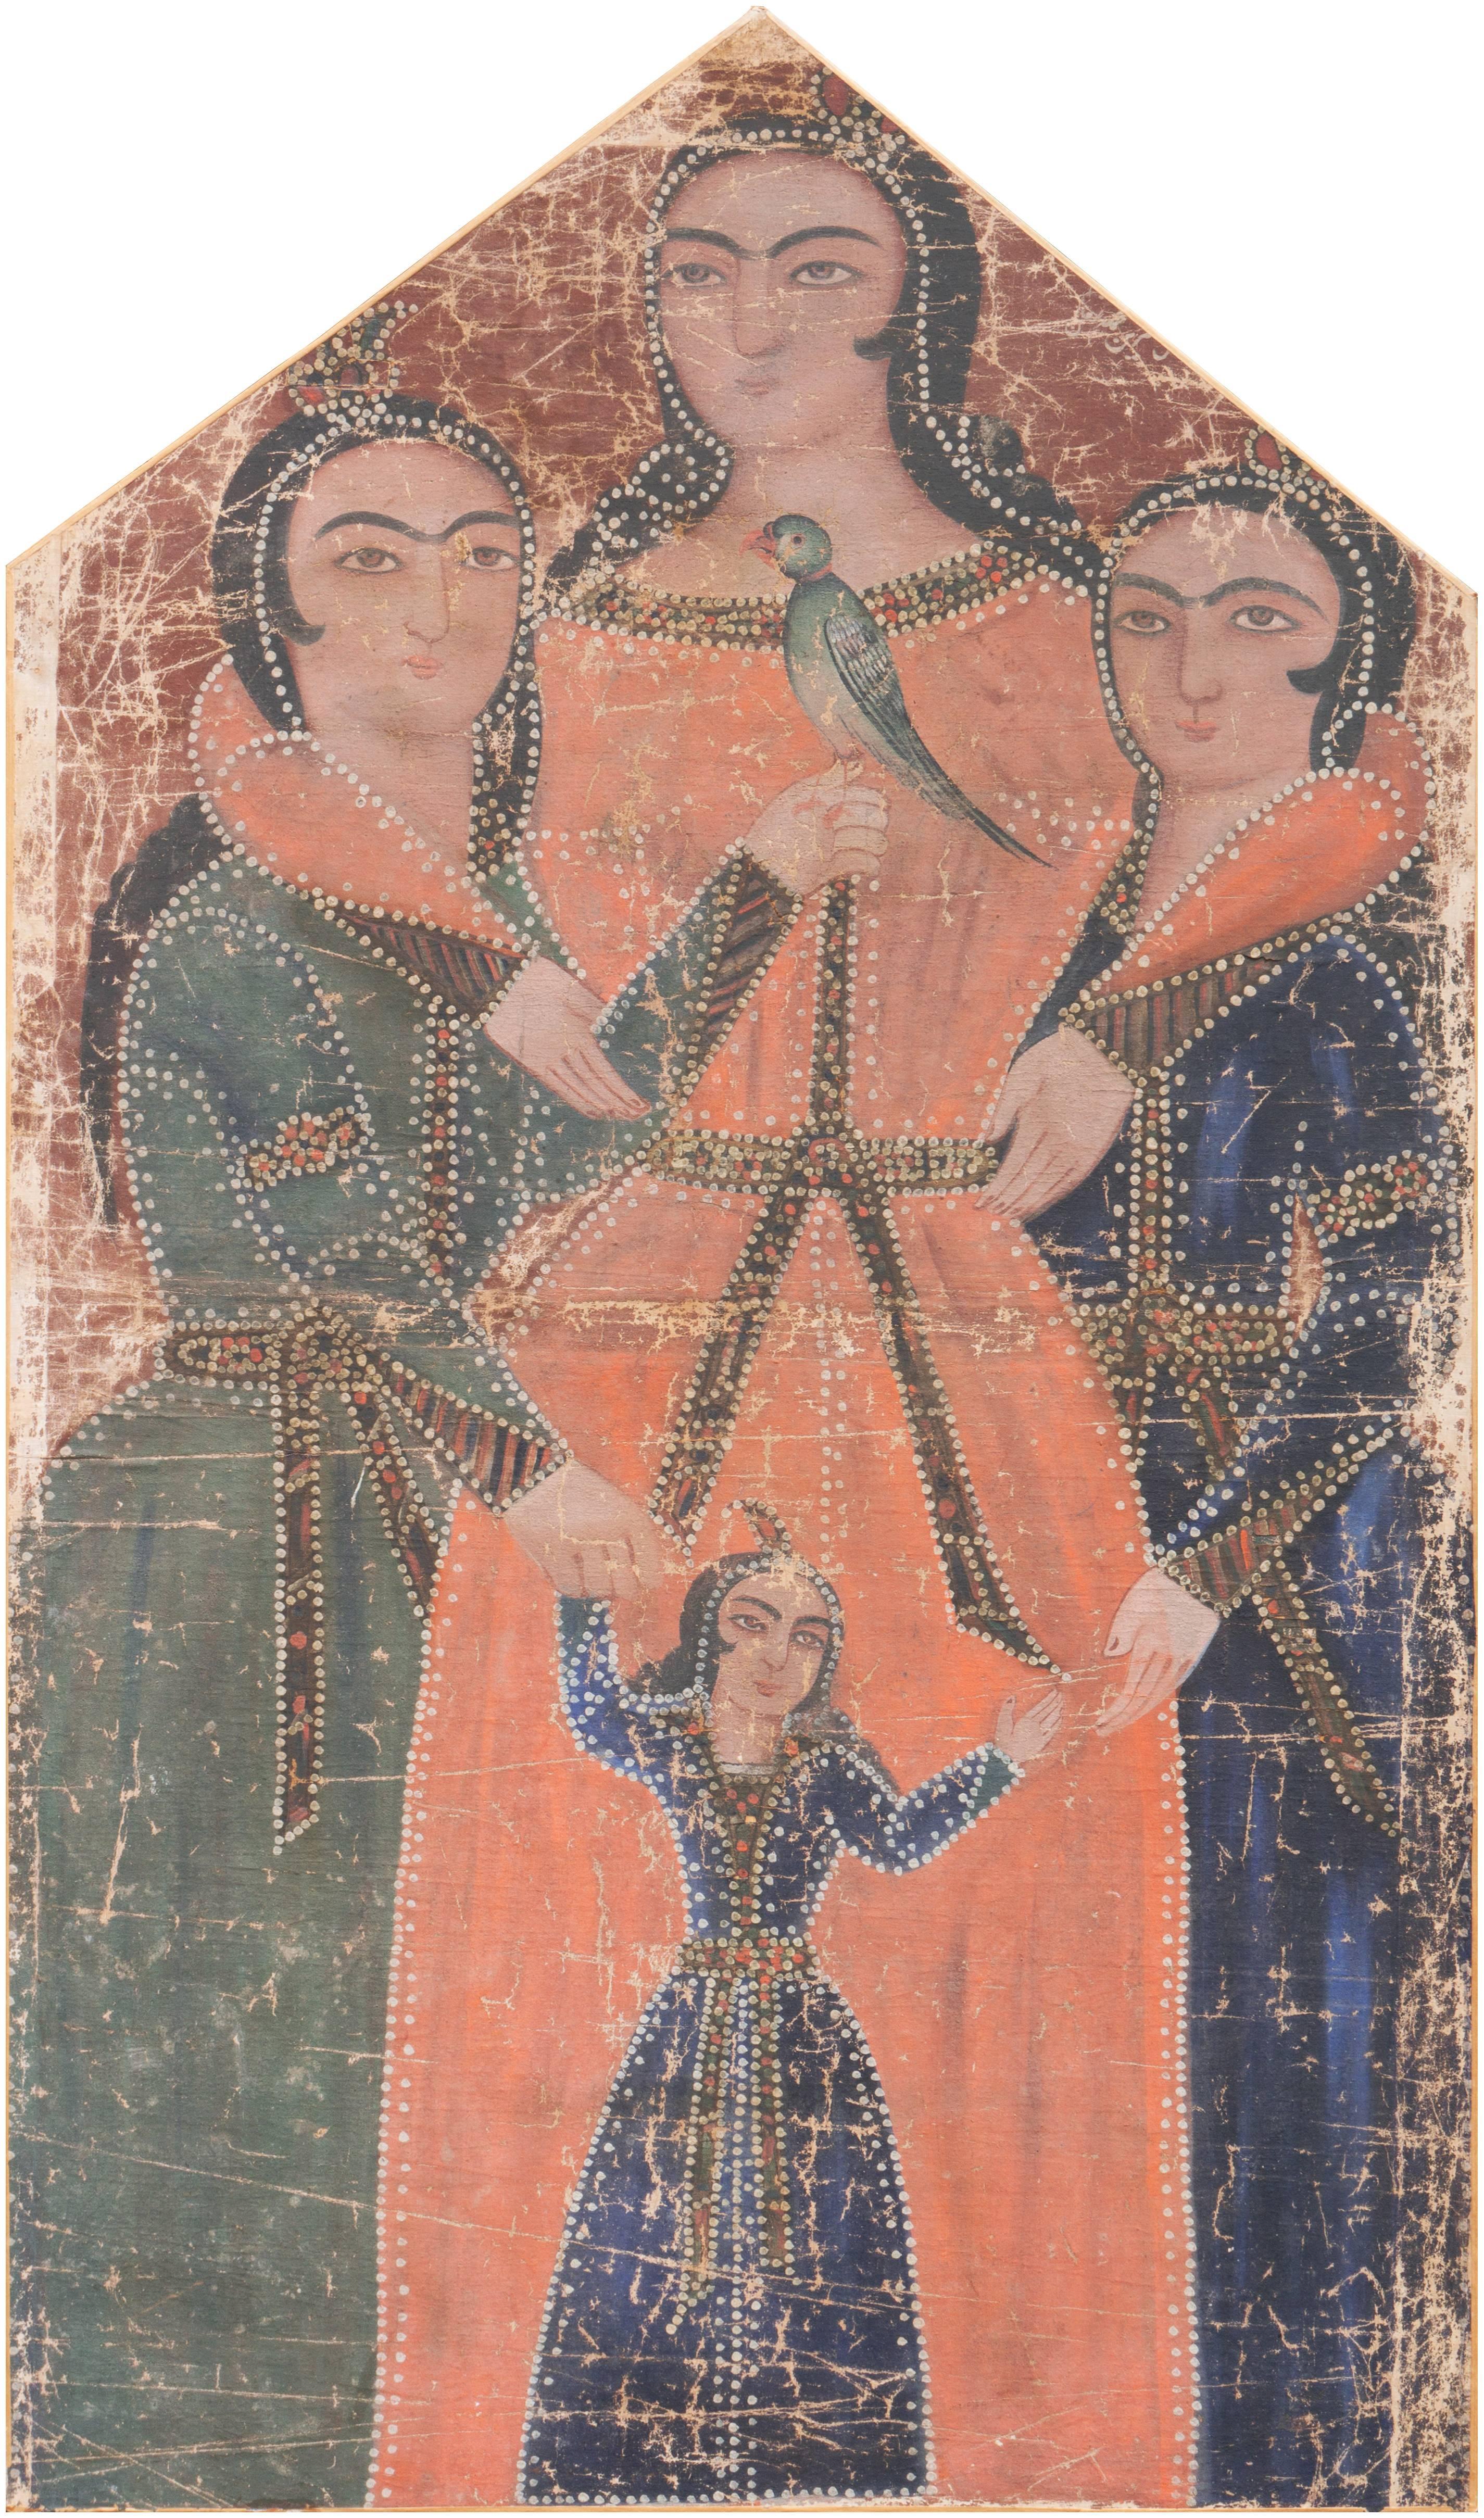 Unknown Portrait Painting - 'Sisters with a Songbird', 18th century Qajar Dynasty Persian Princesses, Zaman